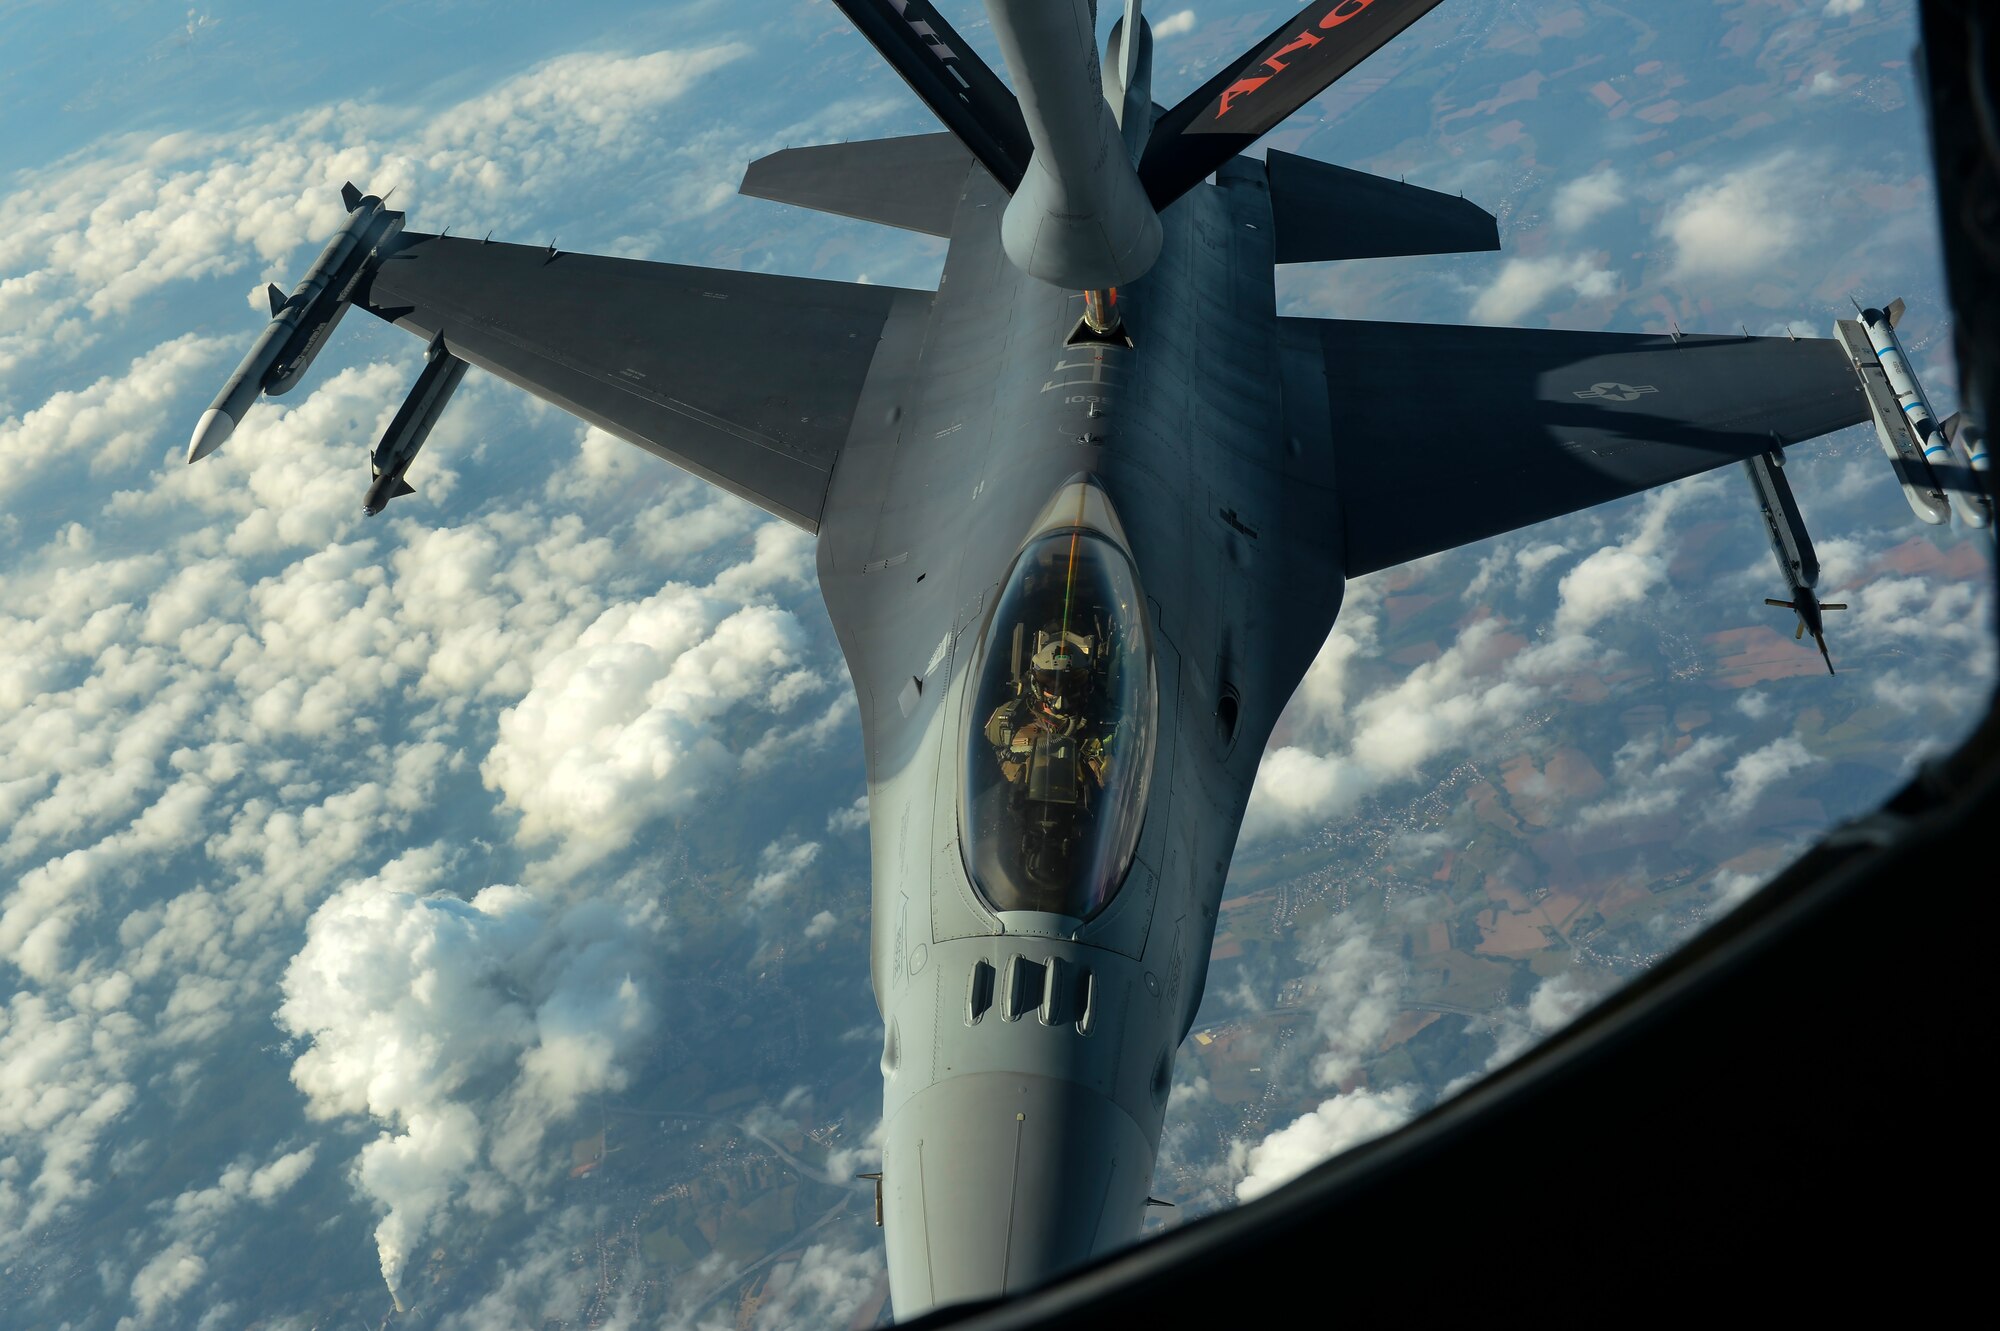 A U.S. Air Force KC-135 Stratotanker, assigned to the 191st Air Refueling Squadron from Roland R. Wright Air National Guard Base, Utah, refuels an F-16 Fighting Falcon assigned to the 52nd Fighter Wing, Spangdahlem Air Base, Germany, Sept. 27, 2016. The Utah ANG unit conducted the routine in-flight refueling to garner experience working with F-16s. (U.S. Air Force photo/Senior Airman Dawn M. Weber)